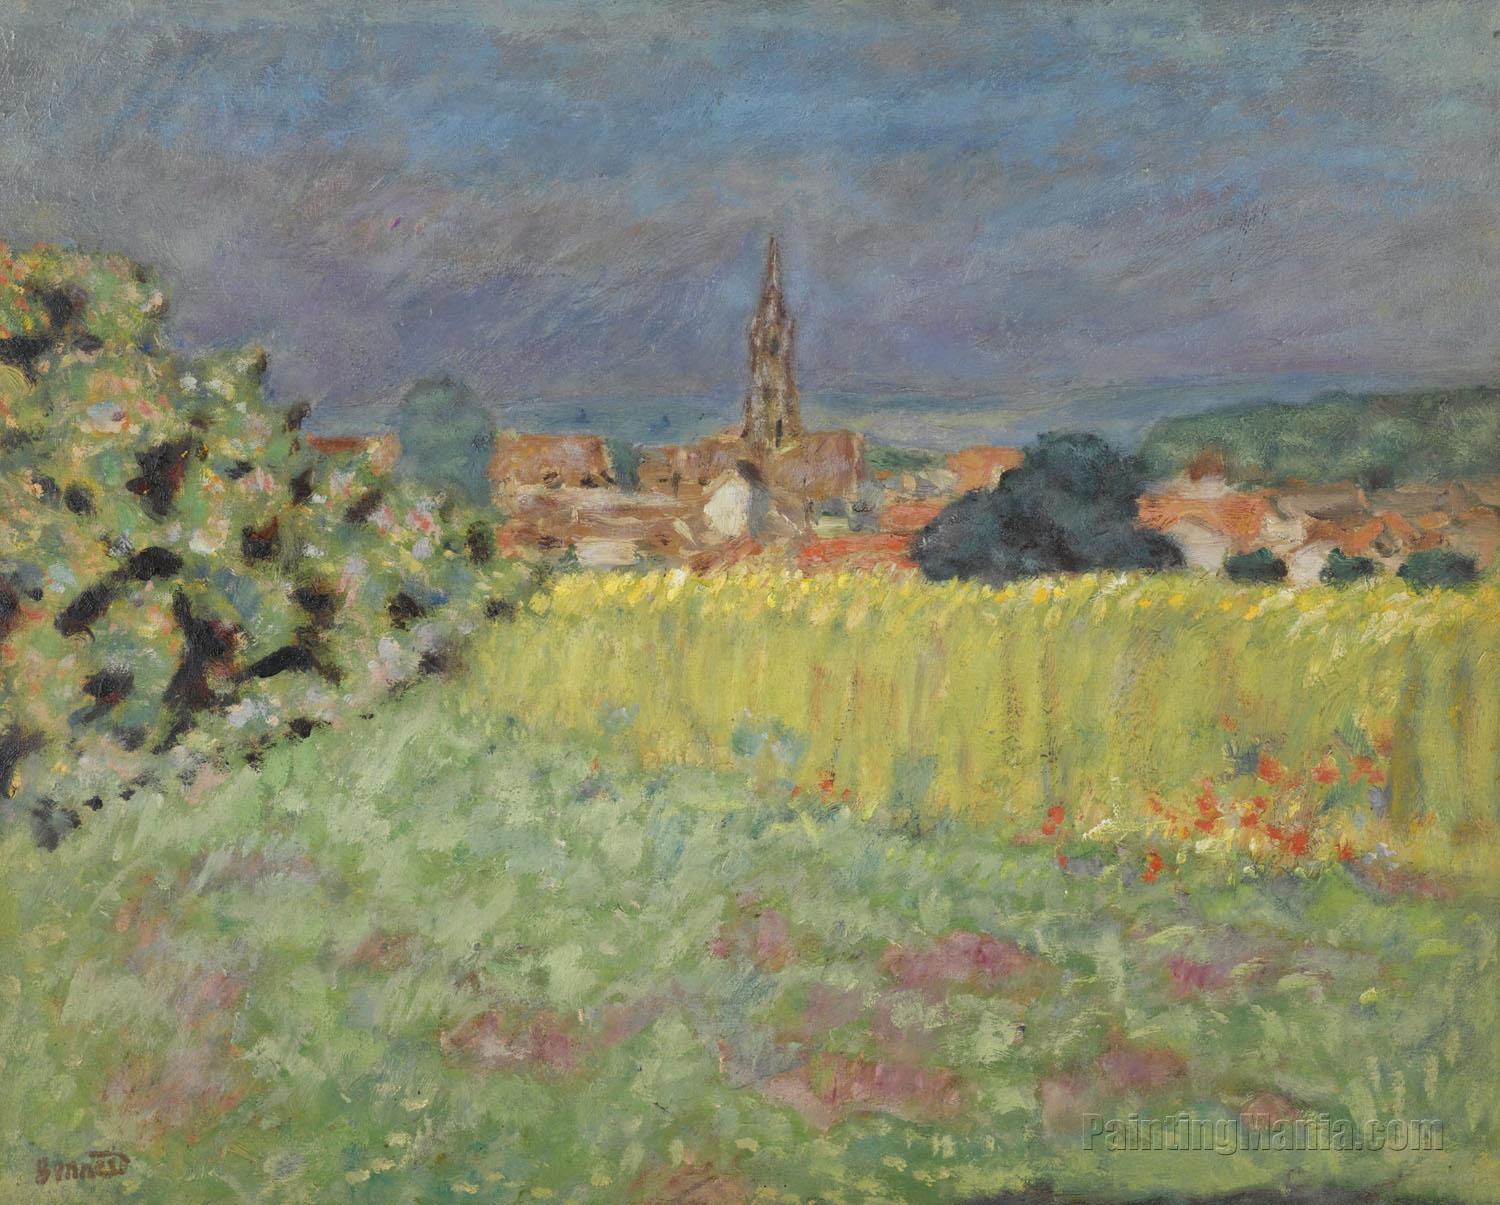 The Wheat Field in Front of the Church